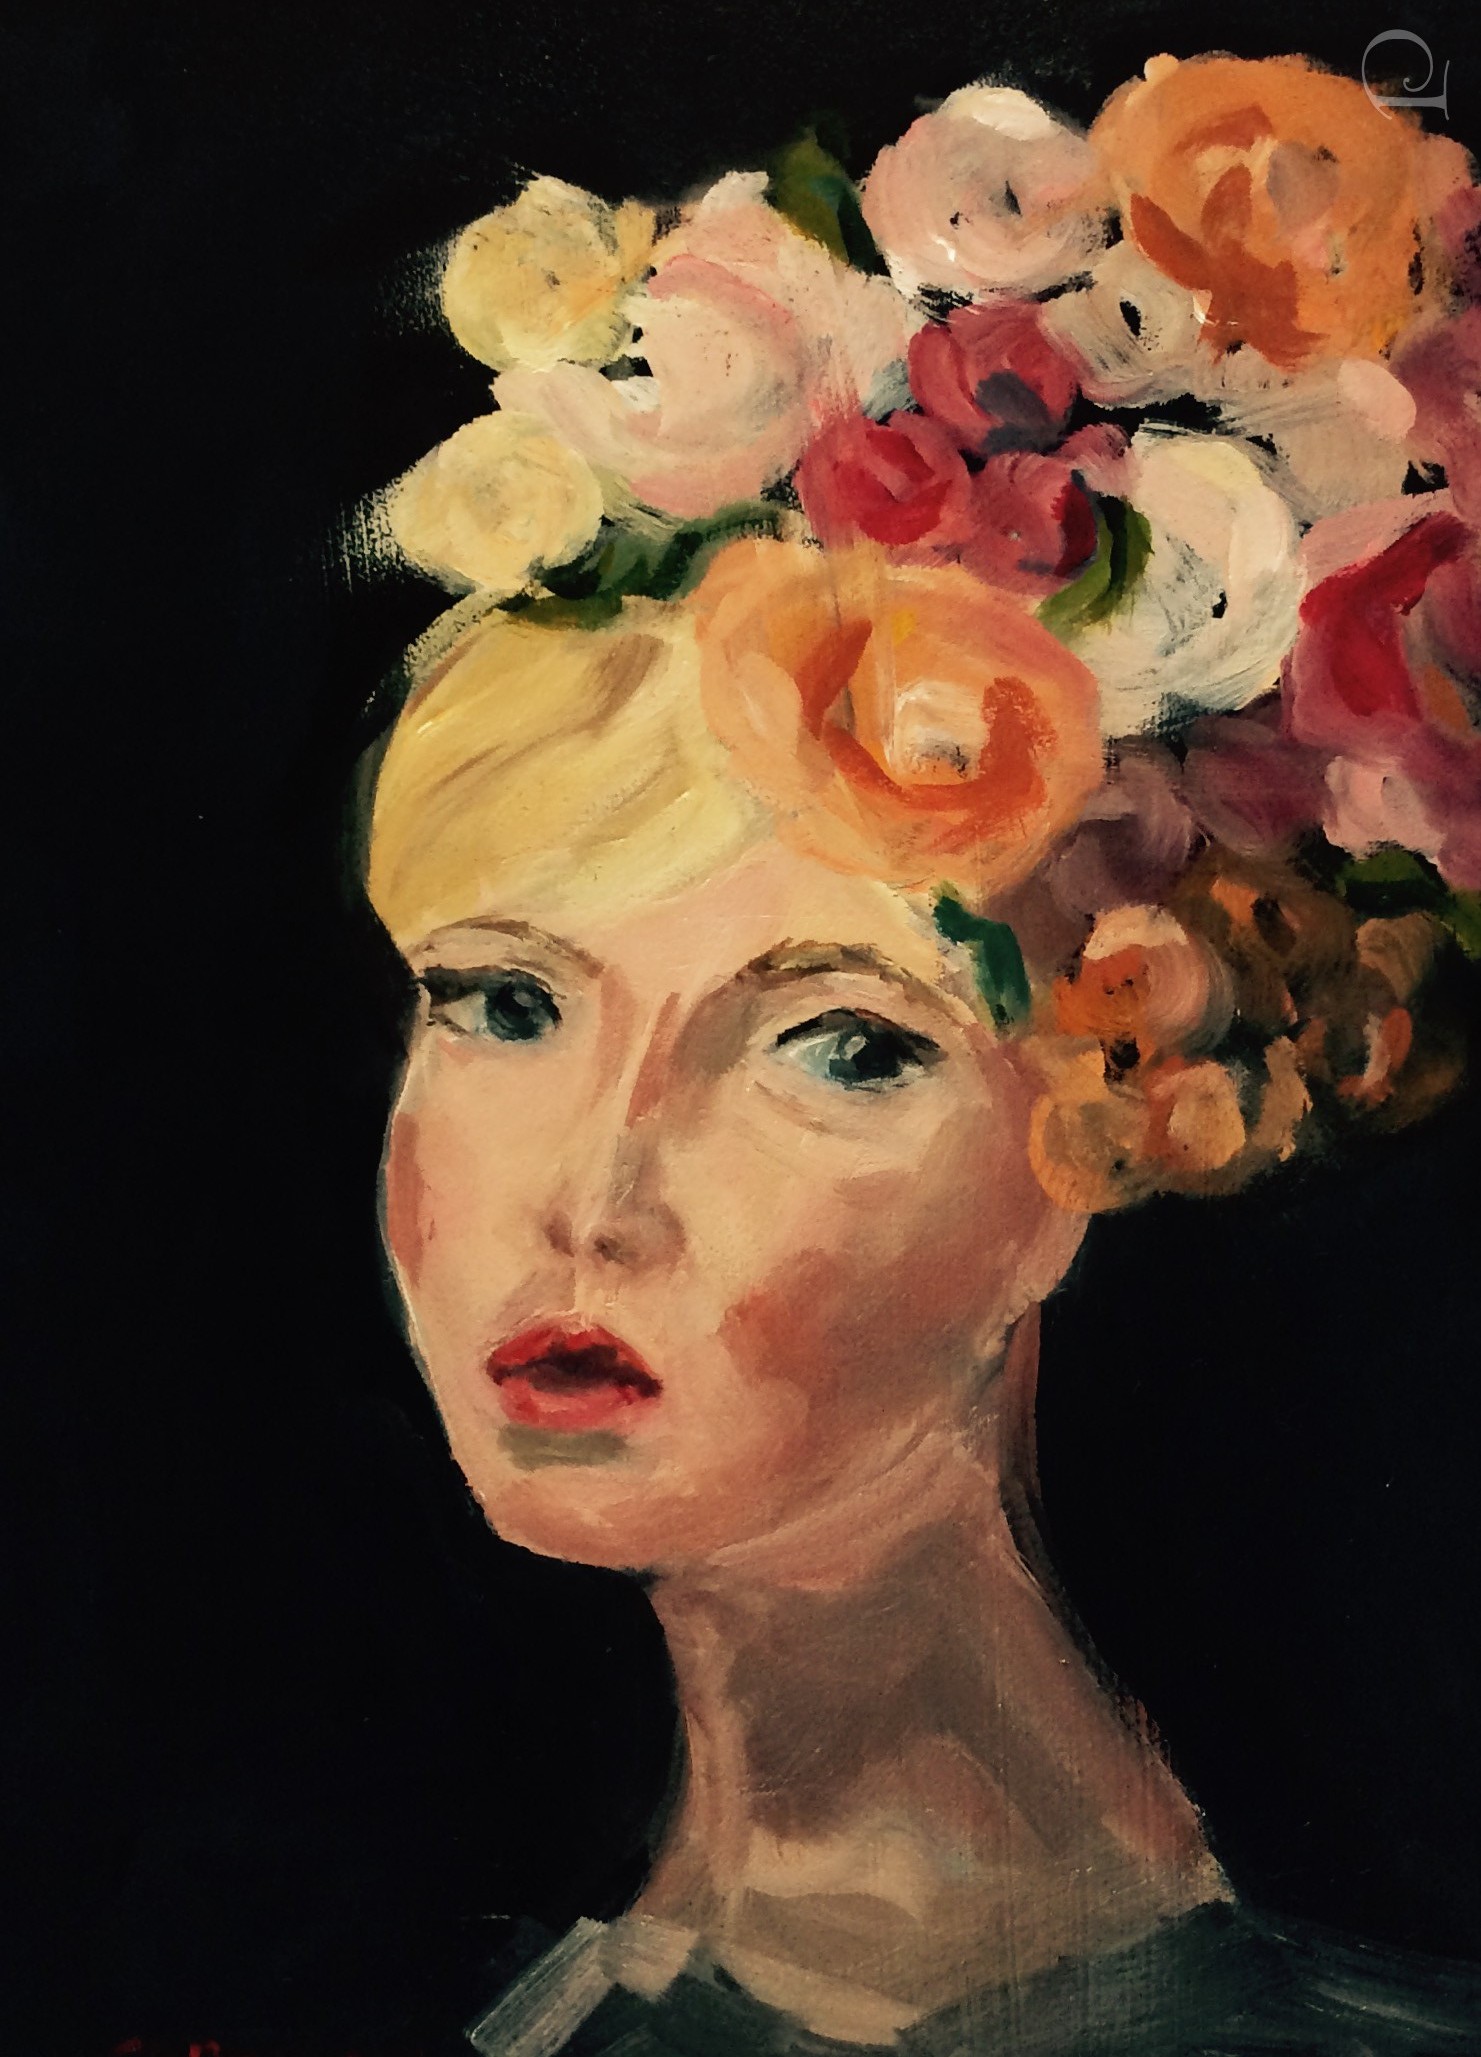 Girl with the flower headpiece by Pamela Copeman